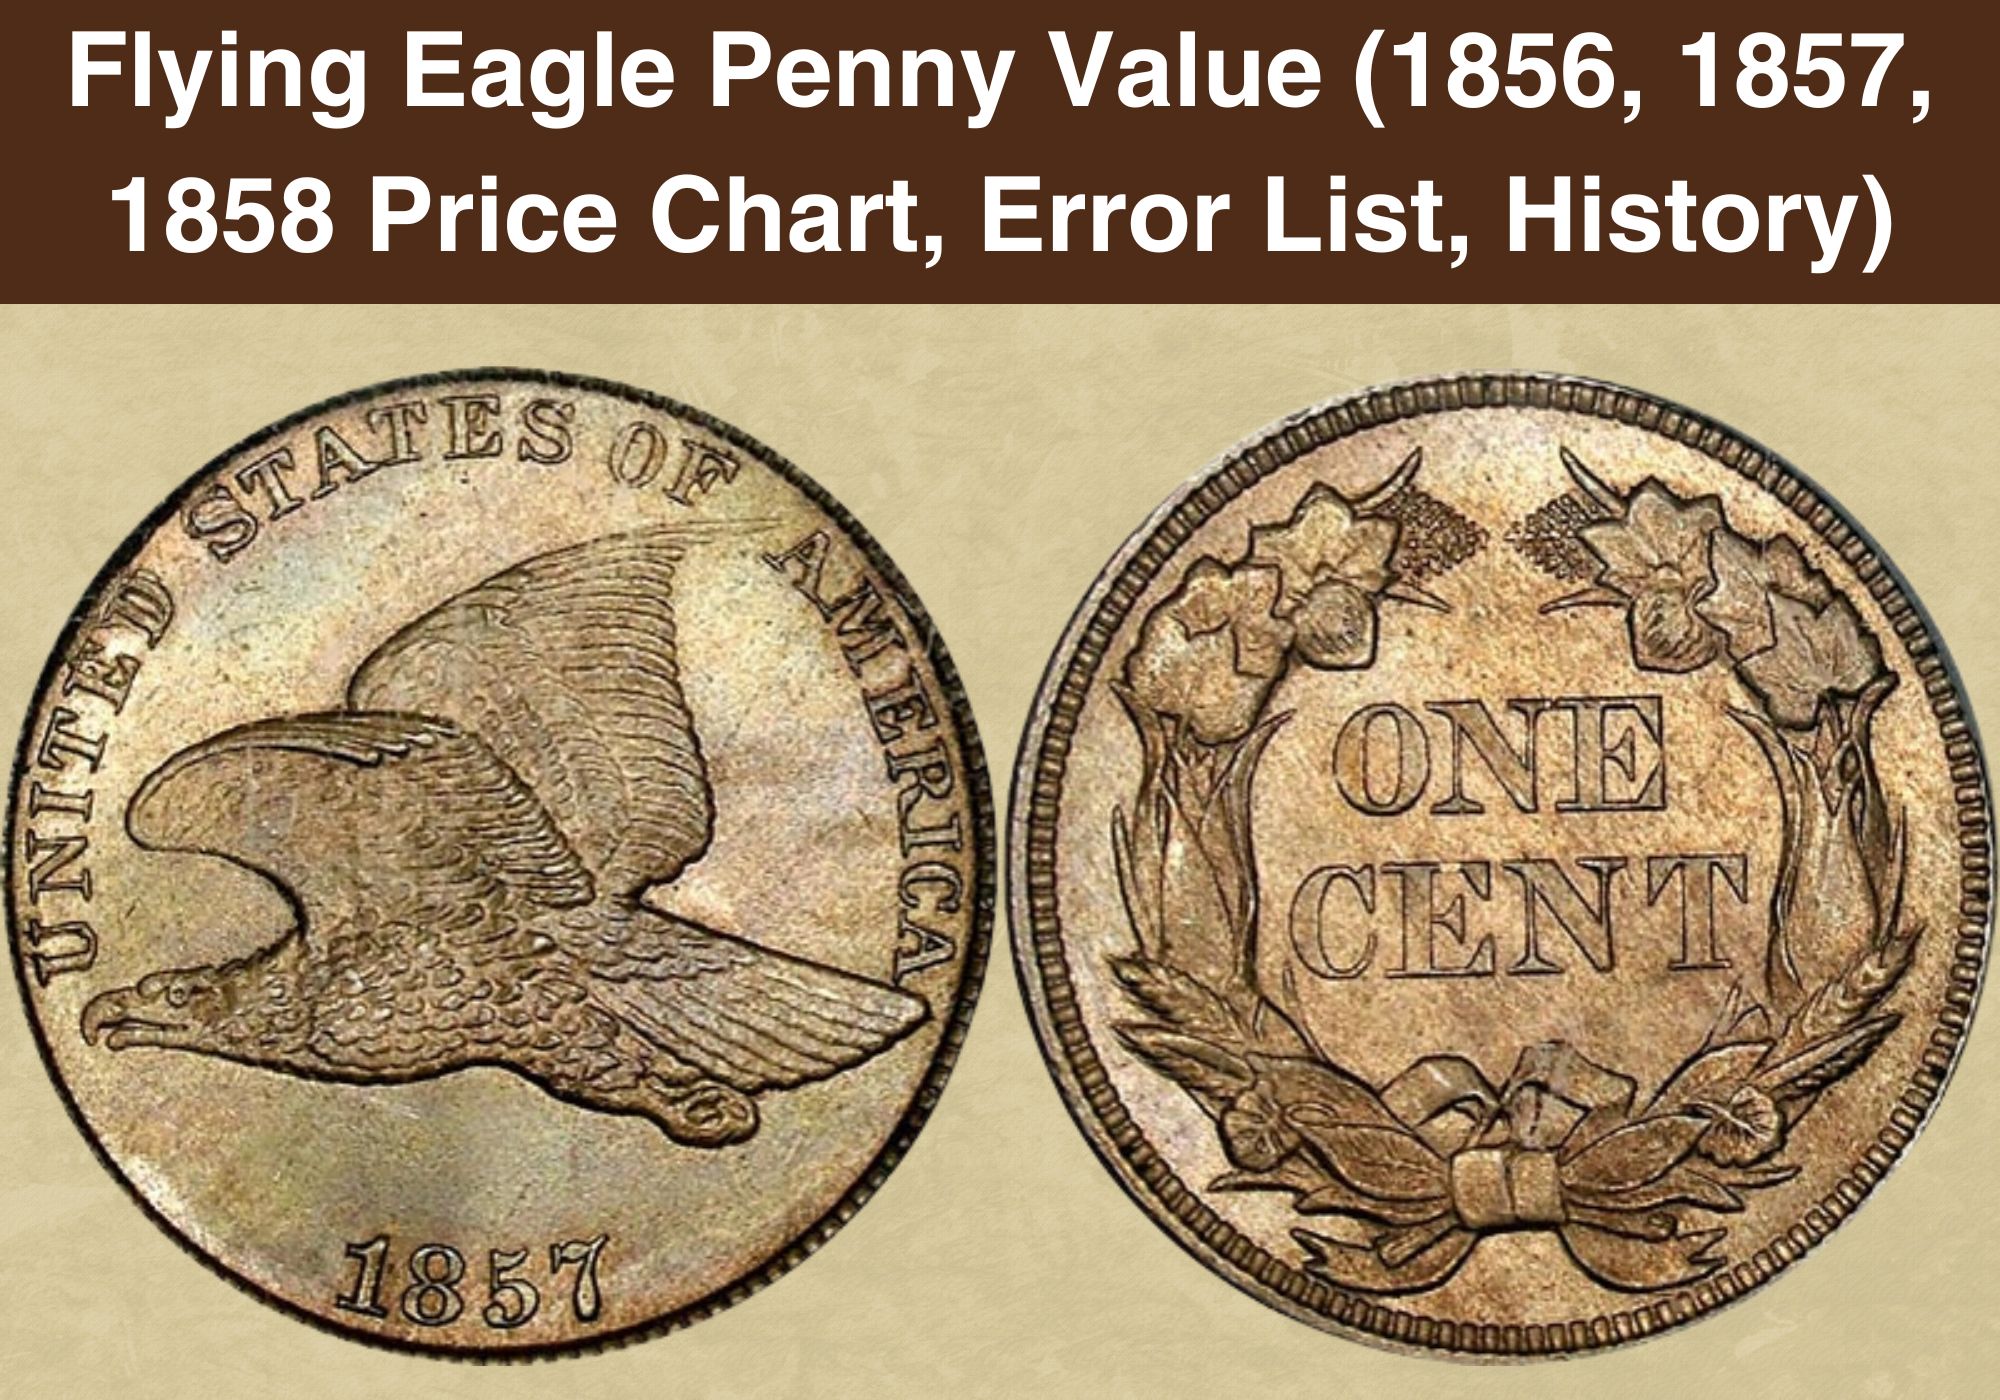 Flying Eagle Penny Coin Value (1856, 1857, 1858 Price Chart, Error List, History)